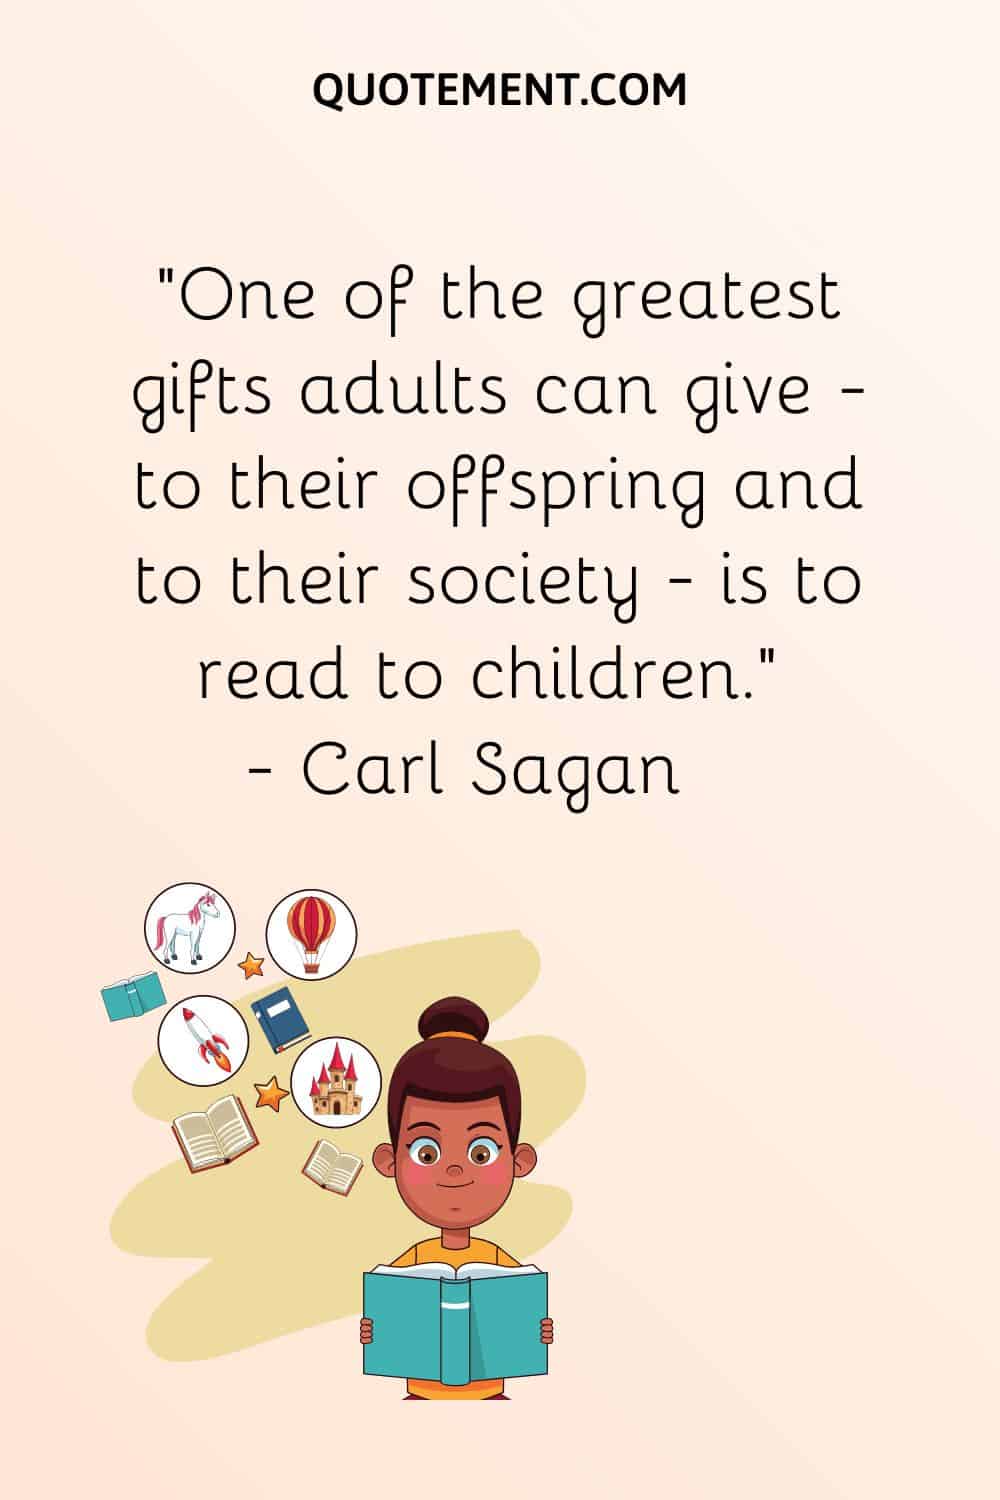 “One of the greatest gifts adults can give—to their offspring and to their society—is to read to children.” — Carl Sagan